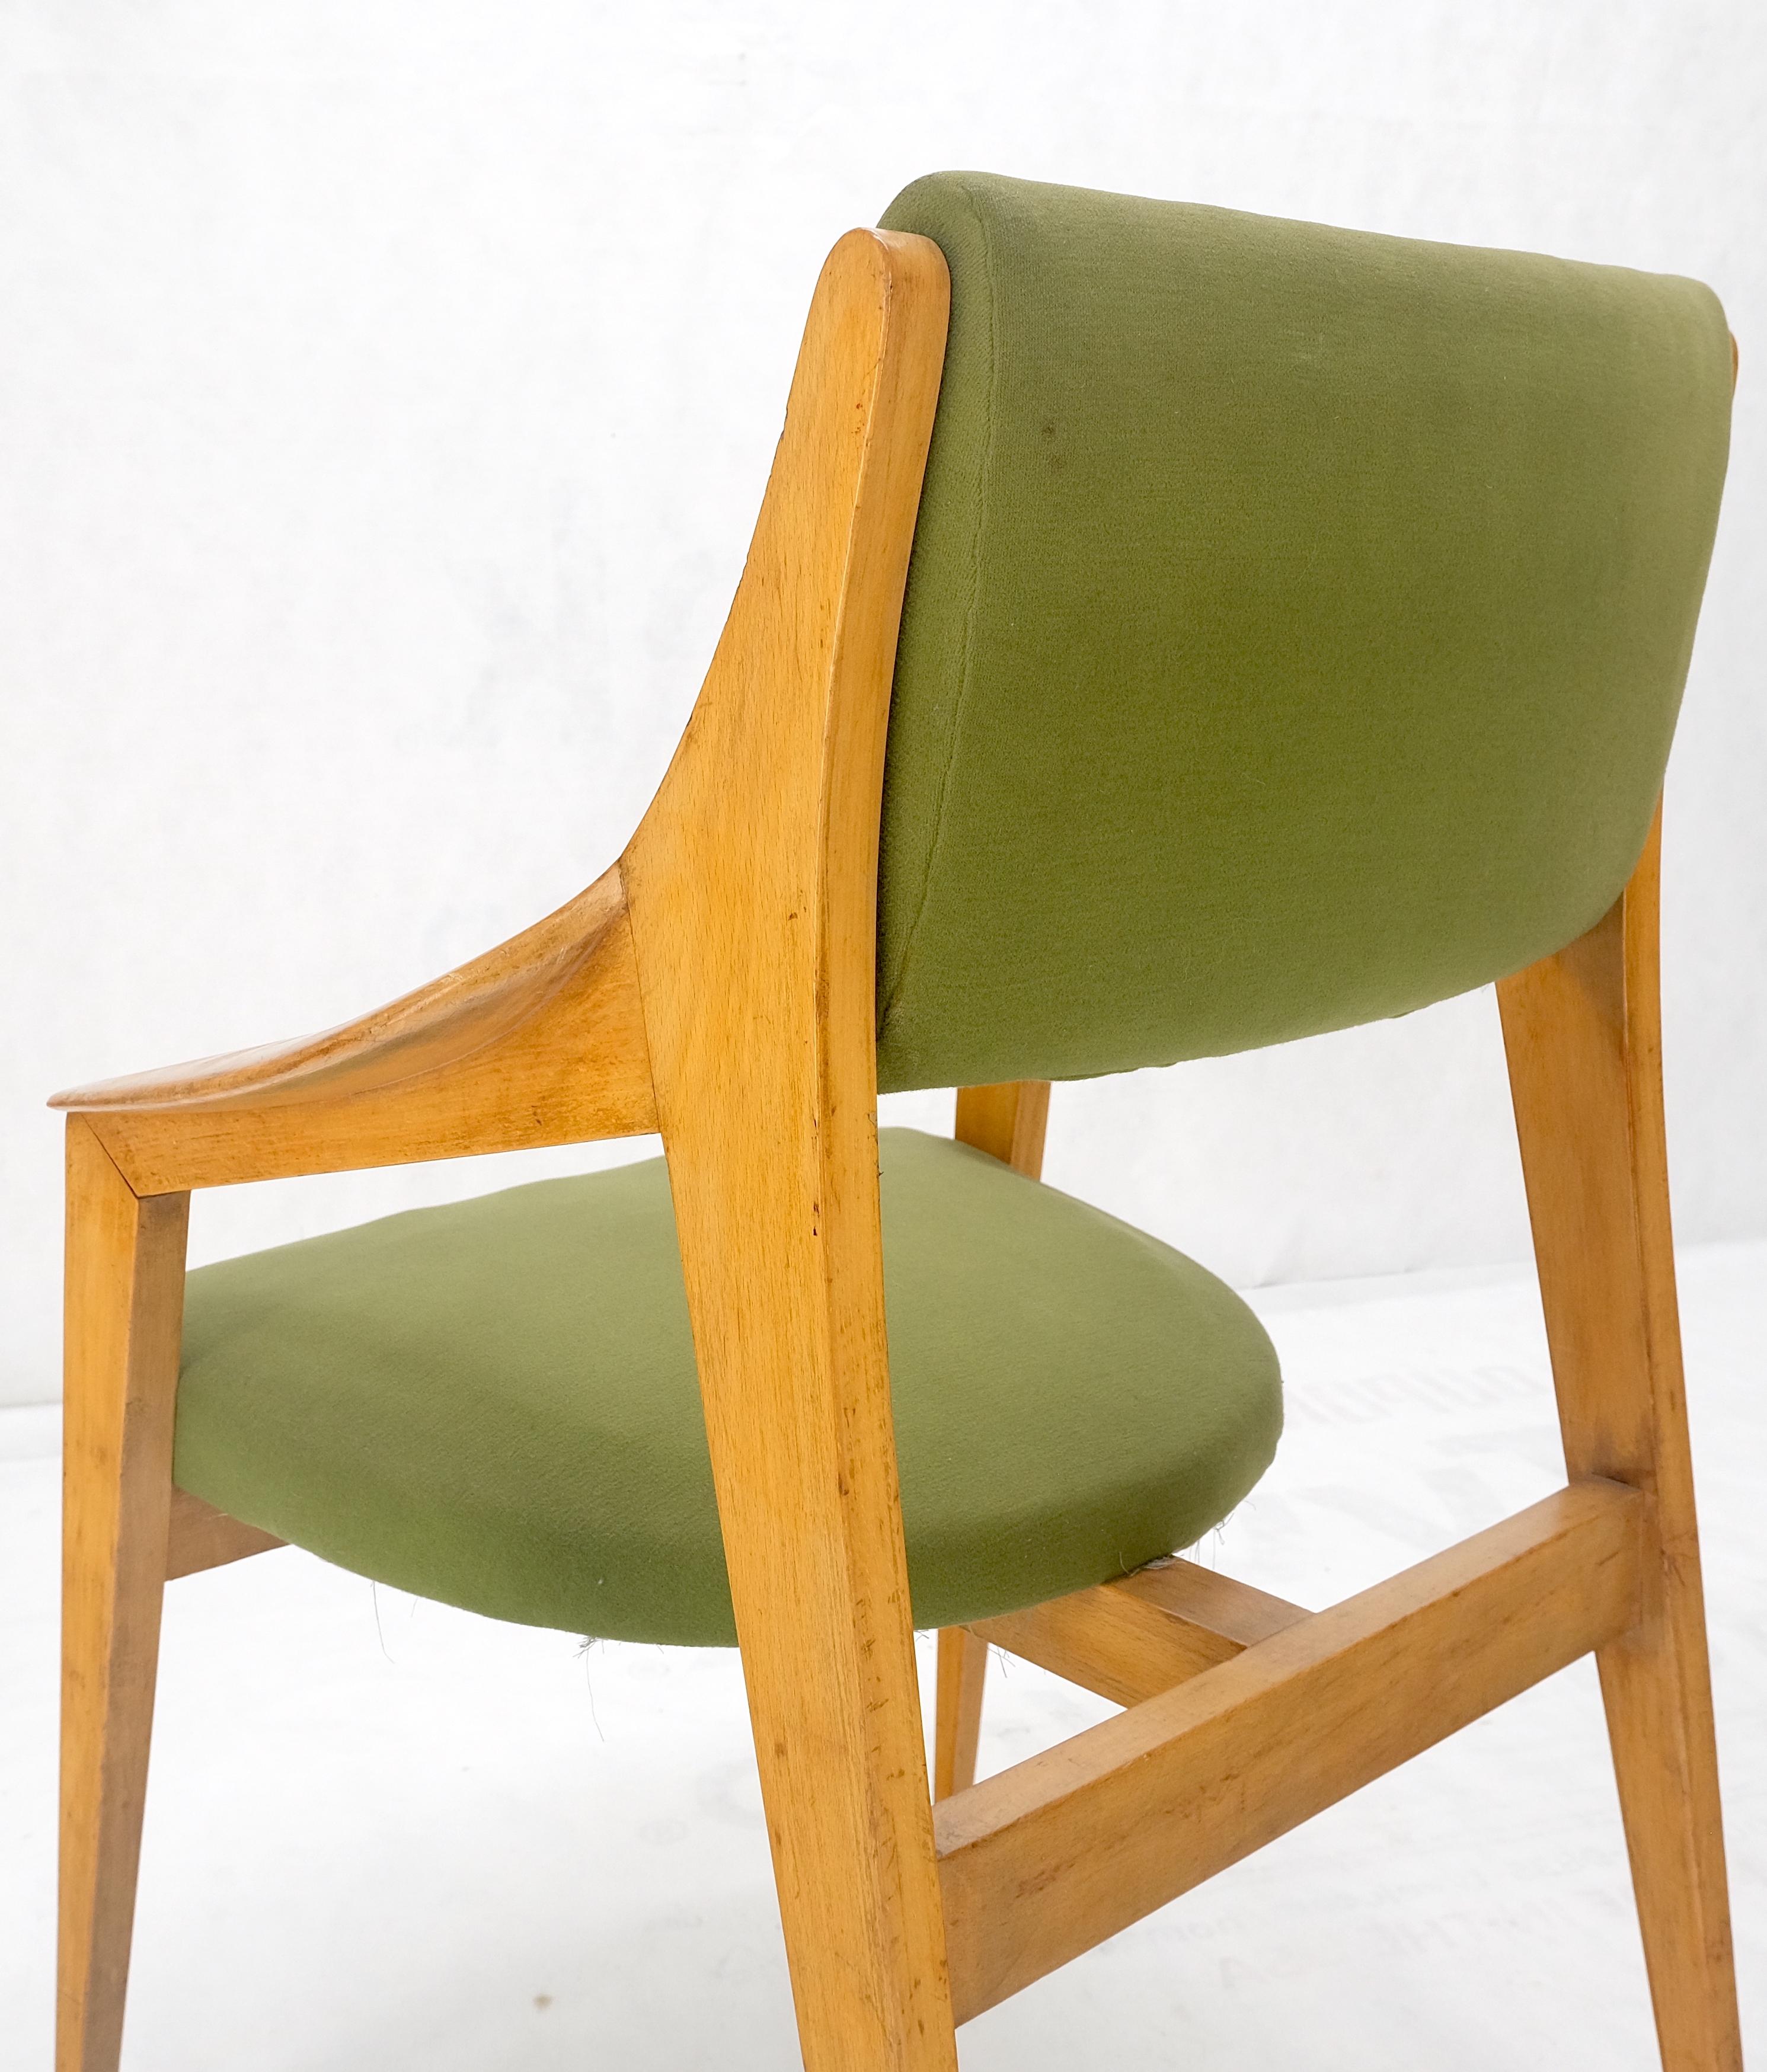 Pair of c1950s Blond Birch Scandinavian Swedish Arm Chairs Green Upholstery In Distressed Condition For Sale In Rockaway, NJ